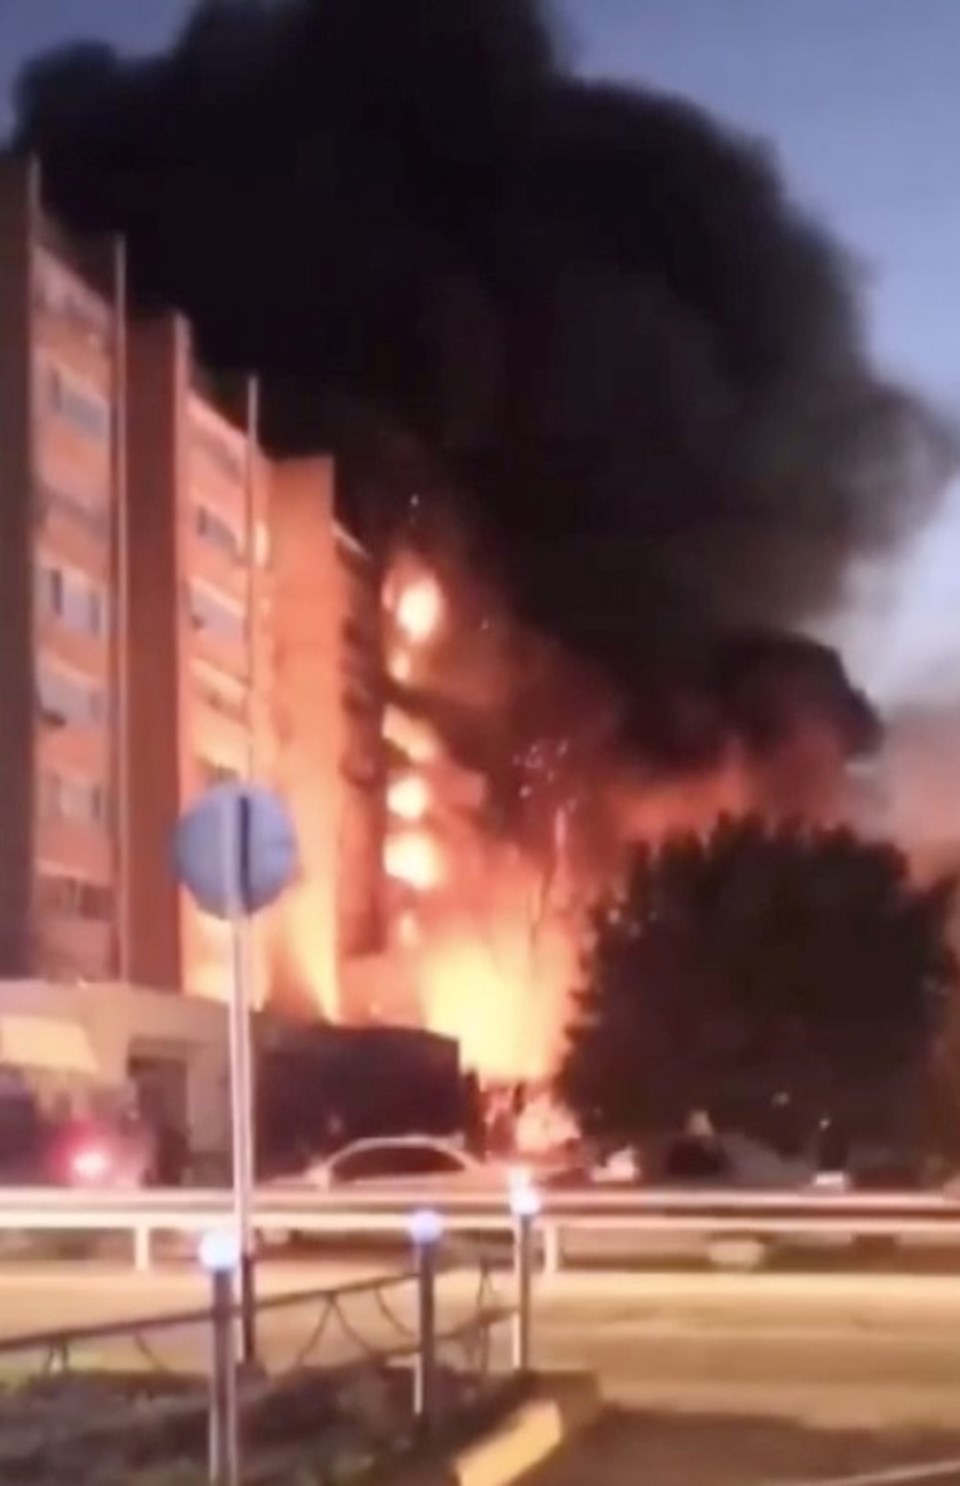 LAST MINUTE NEWS: Russian warplane crashed into the city: 6 dead, 25 injured - 1